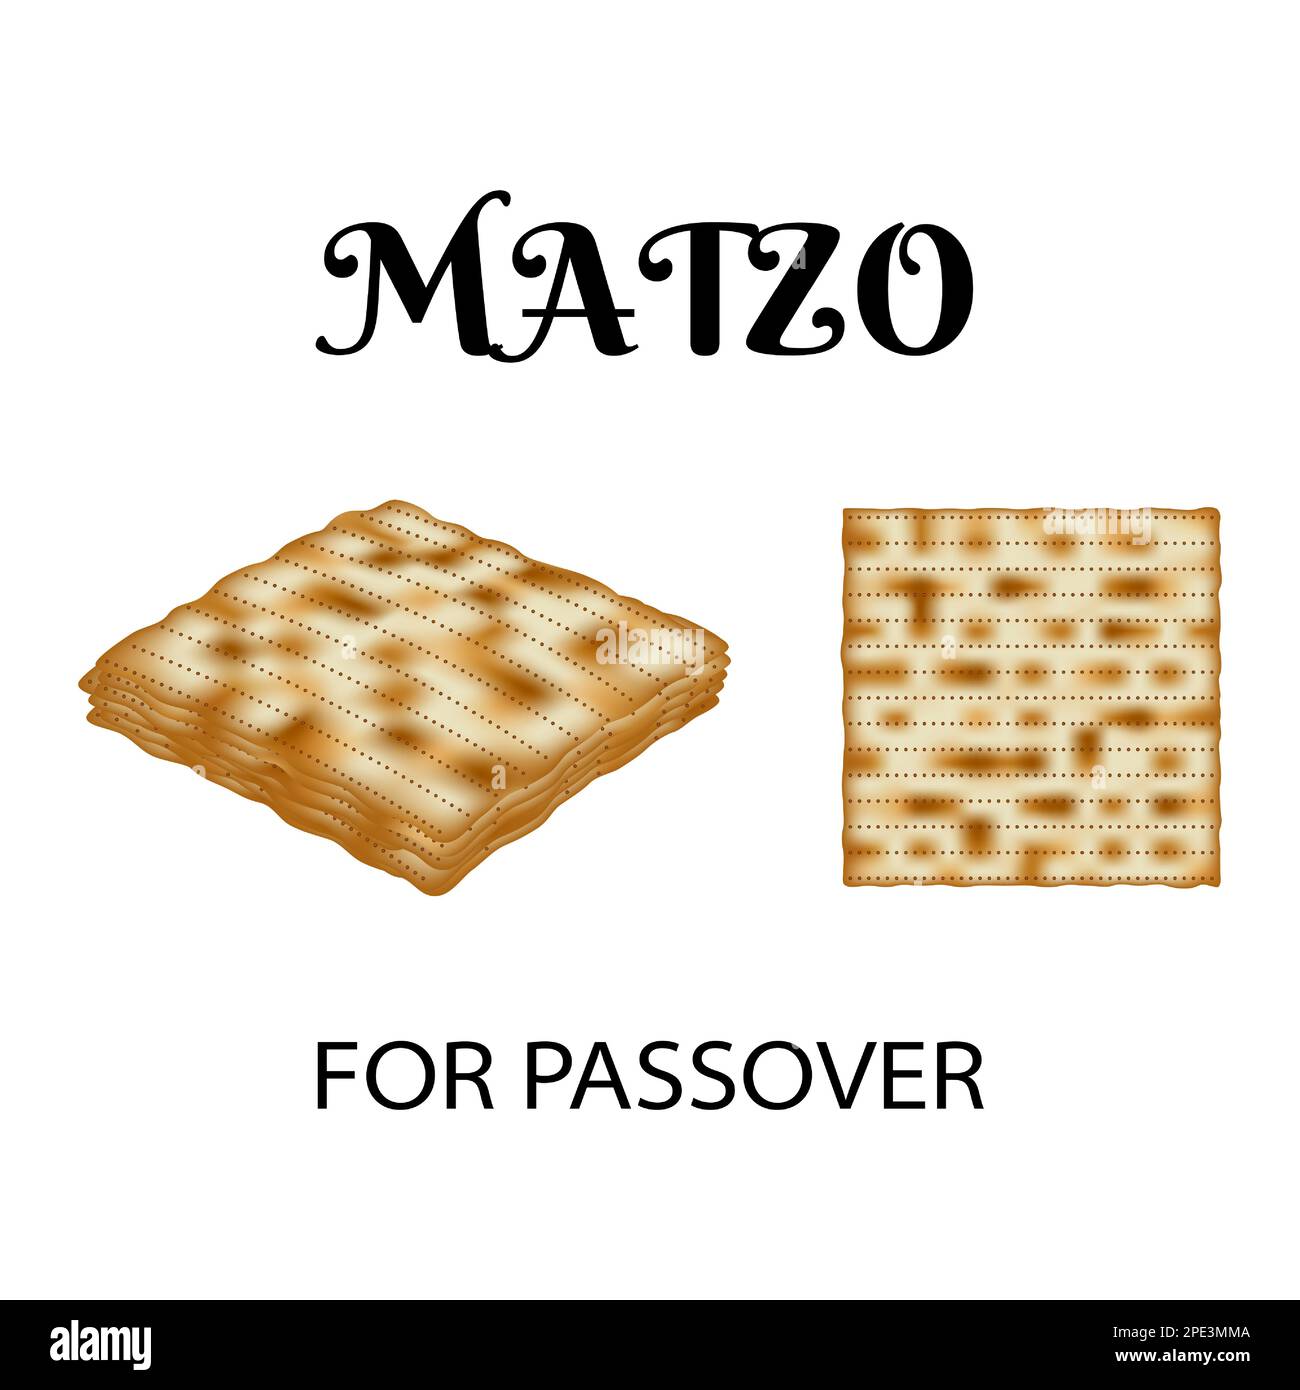 Matzo bread, an important symbol of the Jewish holiday of Passover, representing the haste and exodus of the Israelites from Egypt. Unleavened bread d Stock Vector